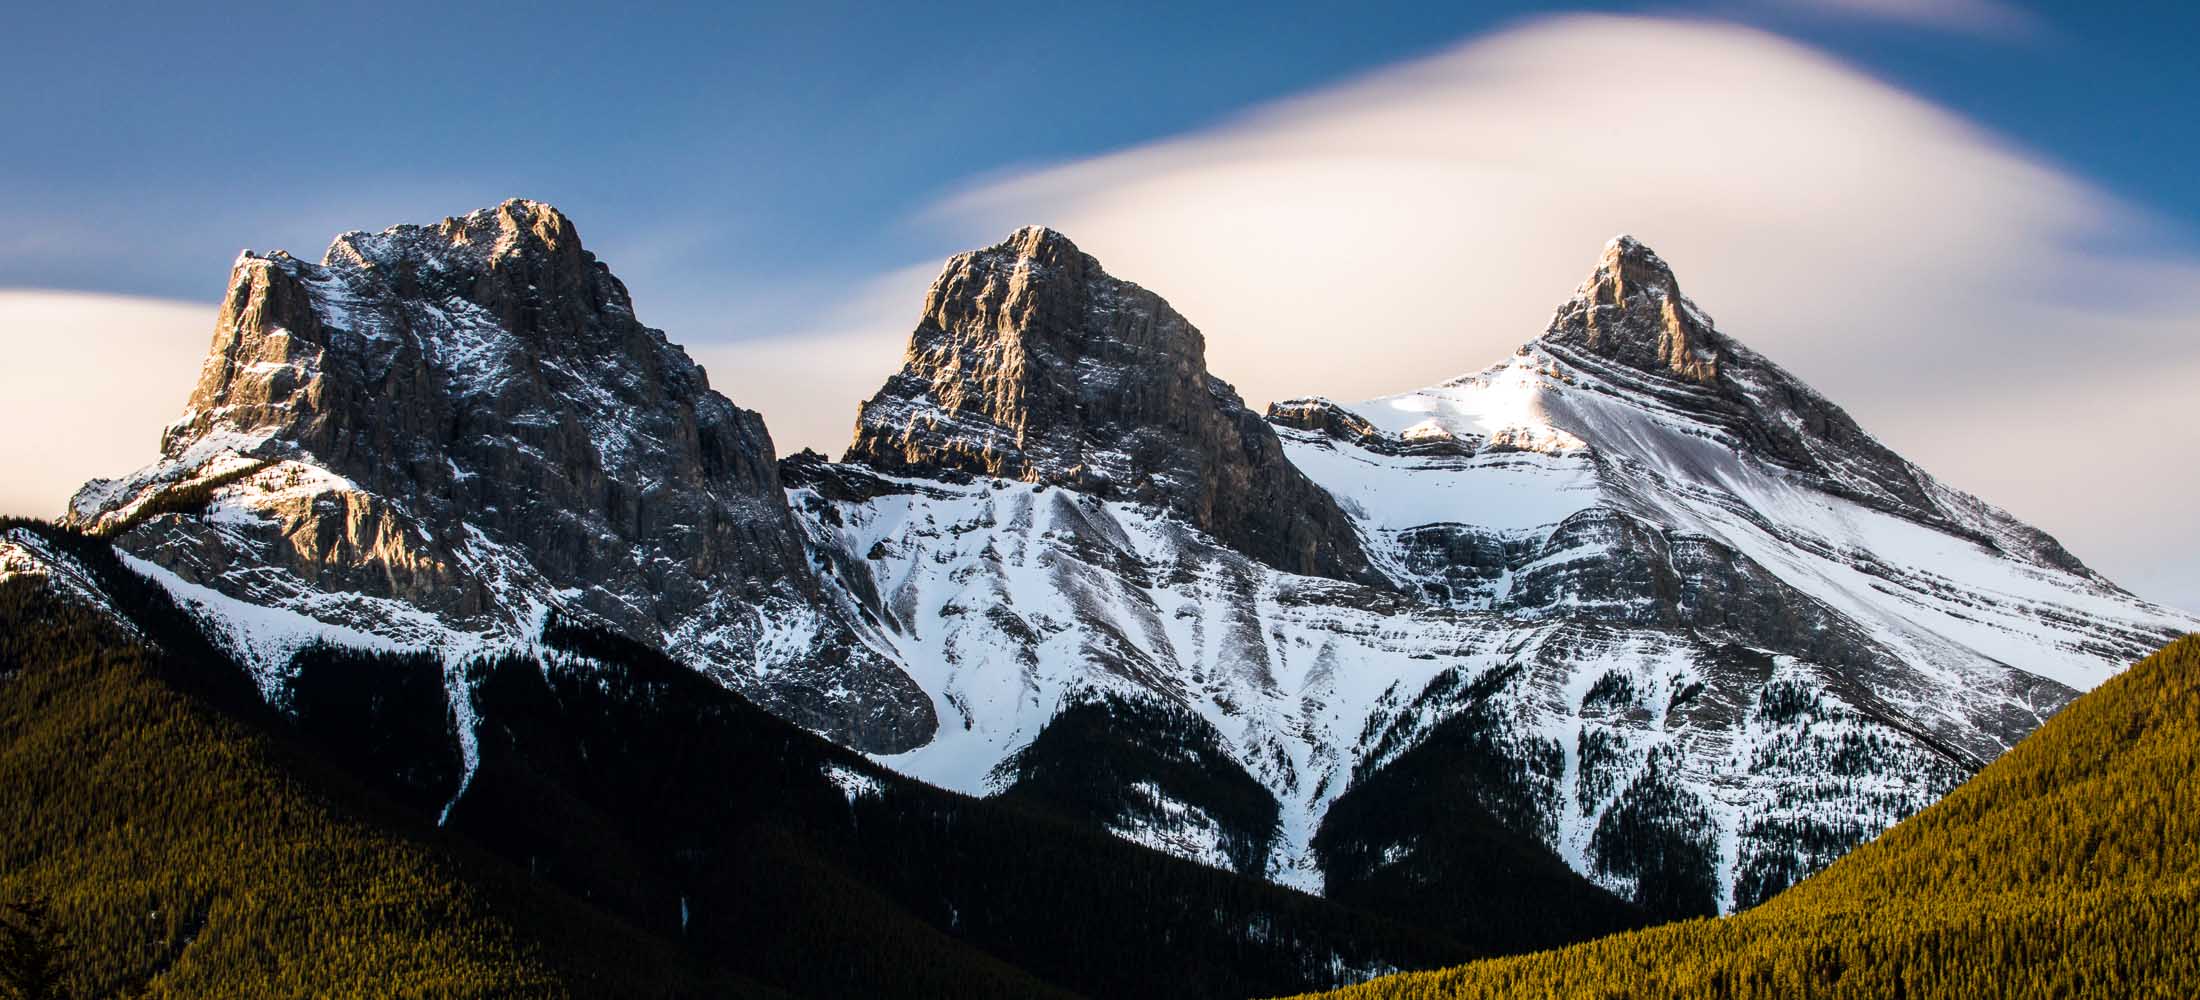 The Three Sisters mountain peaks in Canmore, Alberta